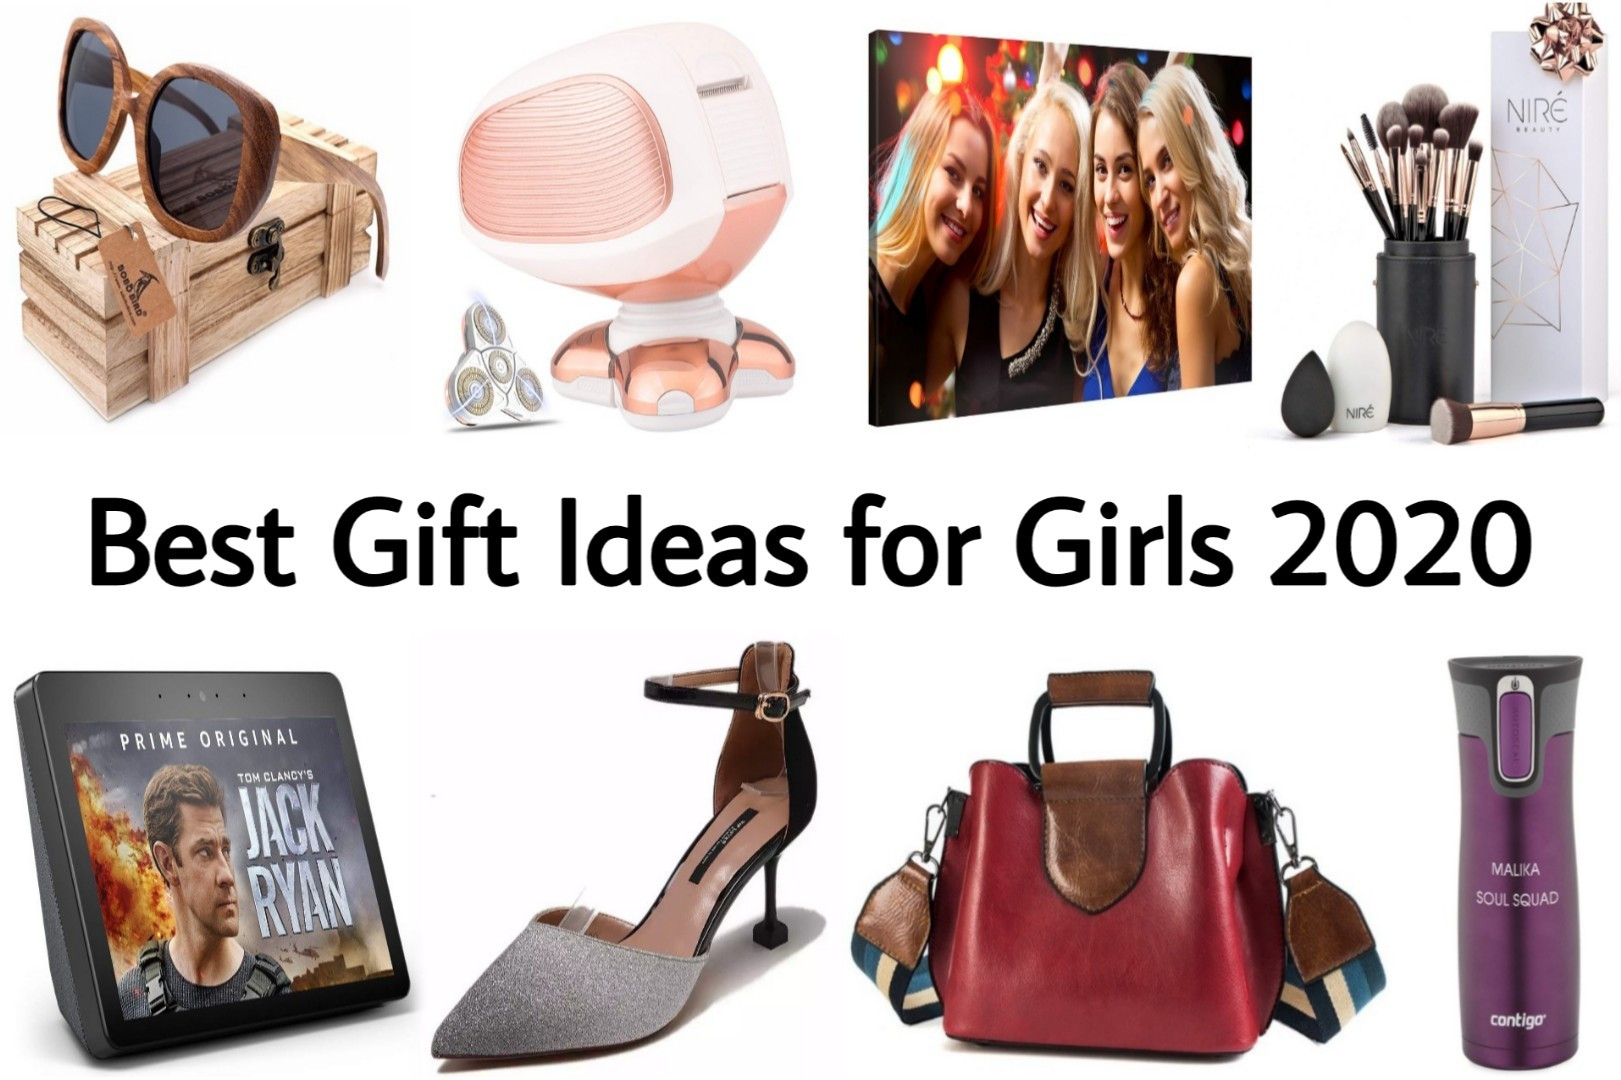 Cool Gift Ideas For Girlfriend
 Best Christmas Gifts For Girlfriend 2020